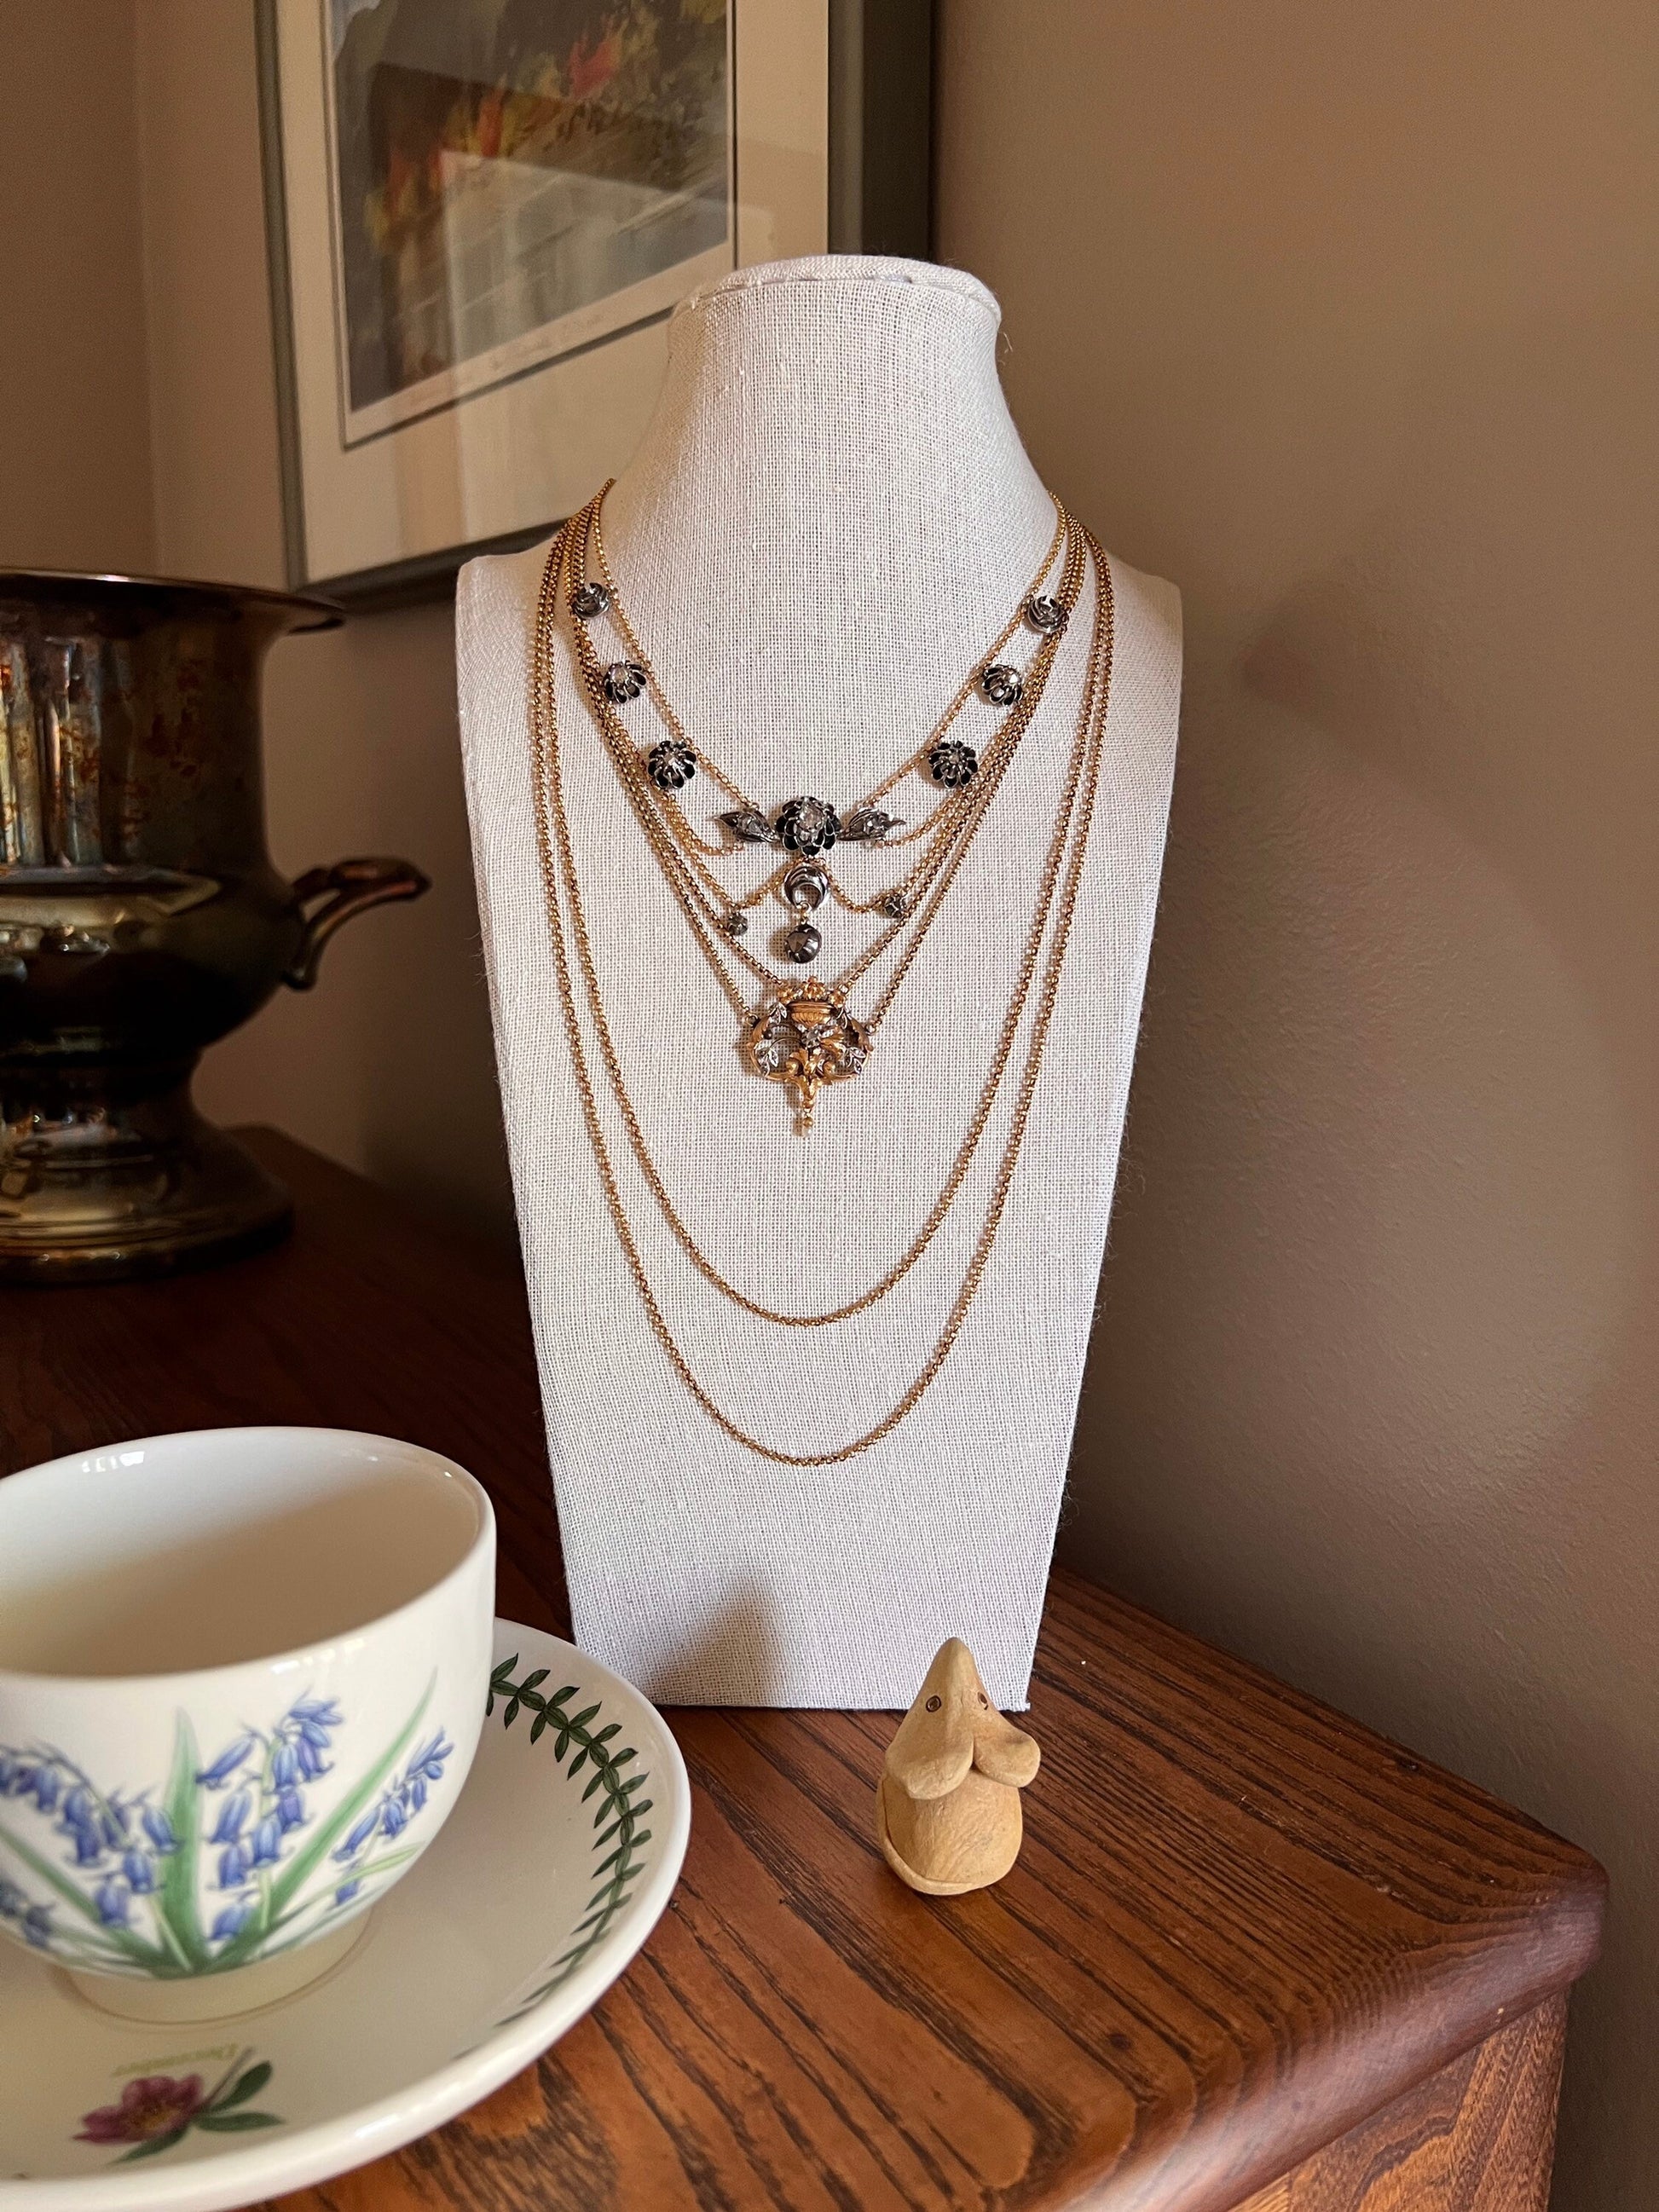 Antique 2Strand Esclavage Chain 1.3 Carat Table Rose Cut DIAMOND 18k Gold Silver Collet Necklace Giardinetti 15" Choker Bridal Something Old